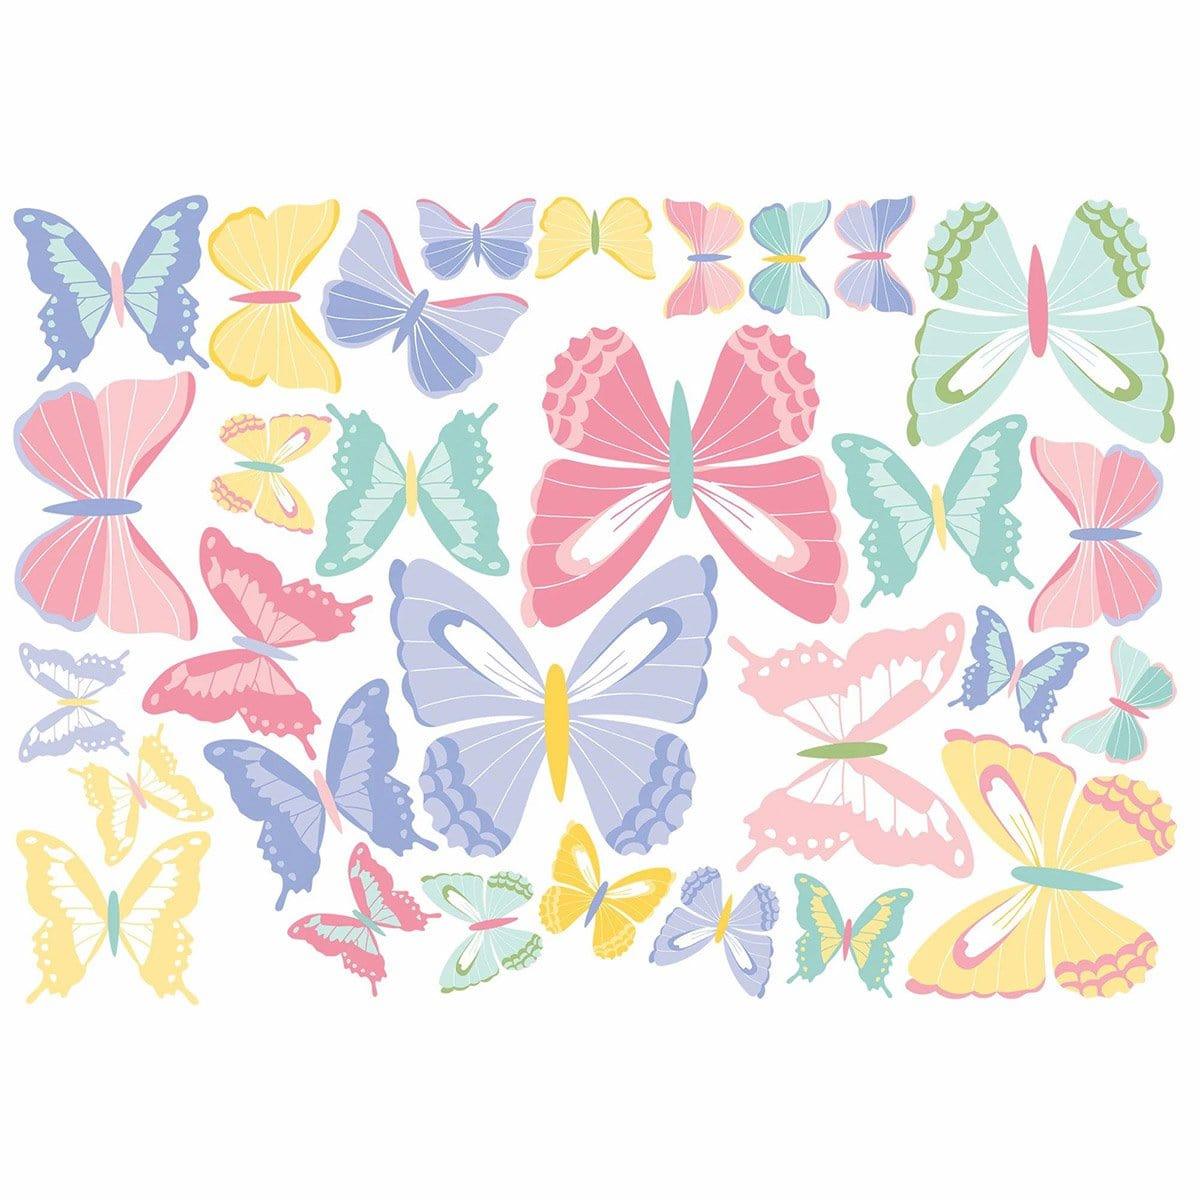 Buy Spring Butterfly 3D Cutouts, 30 Count sold at Party Expert